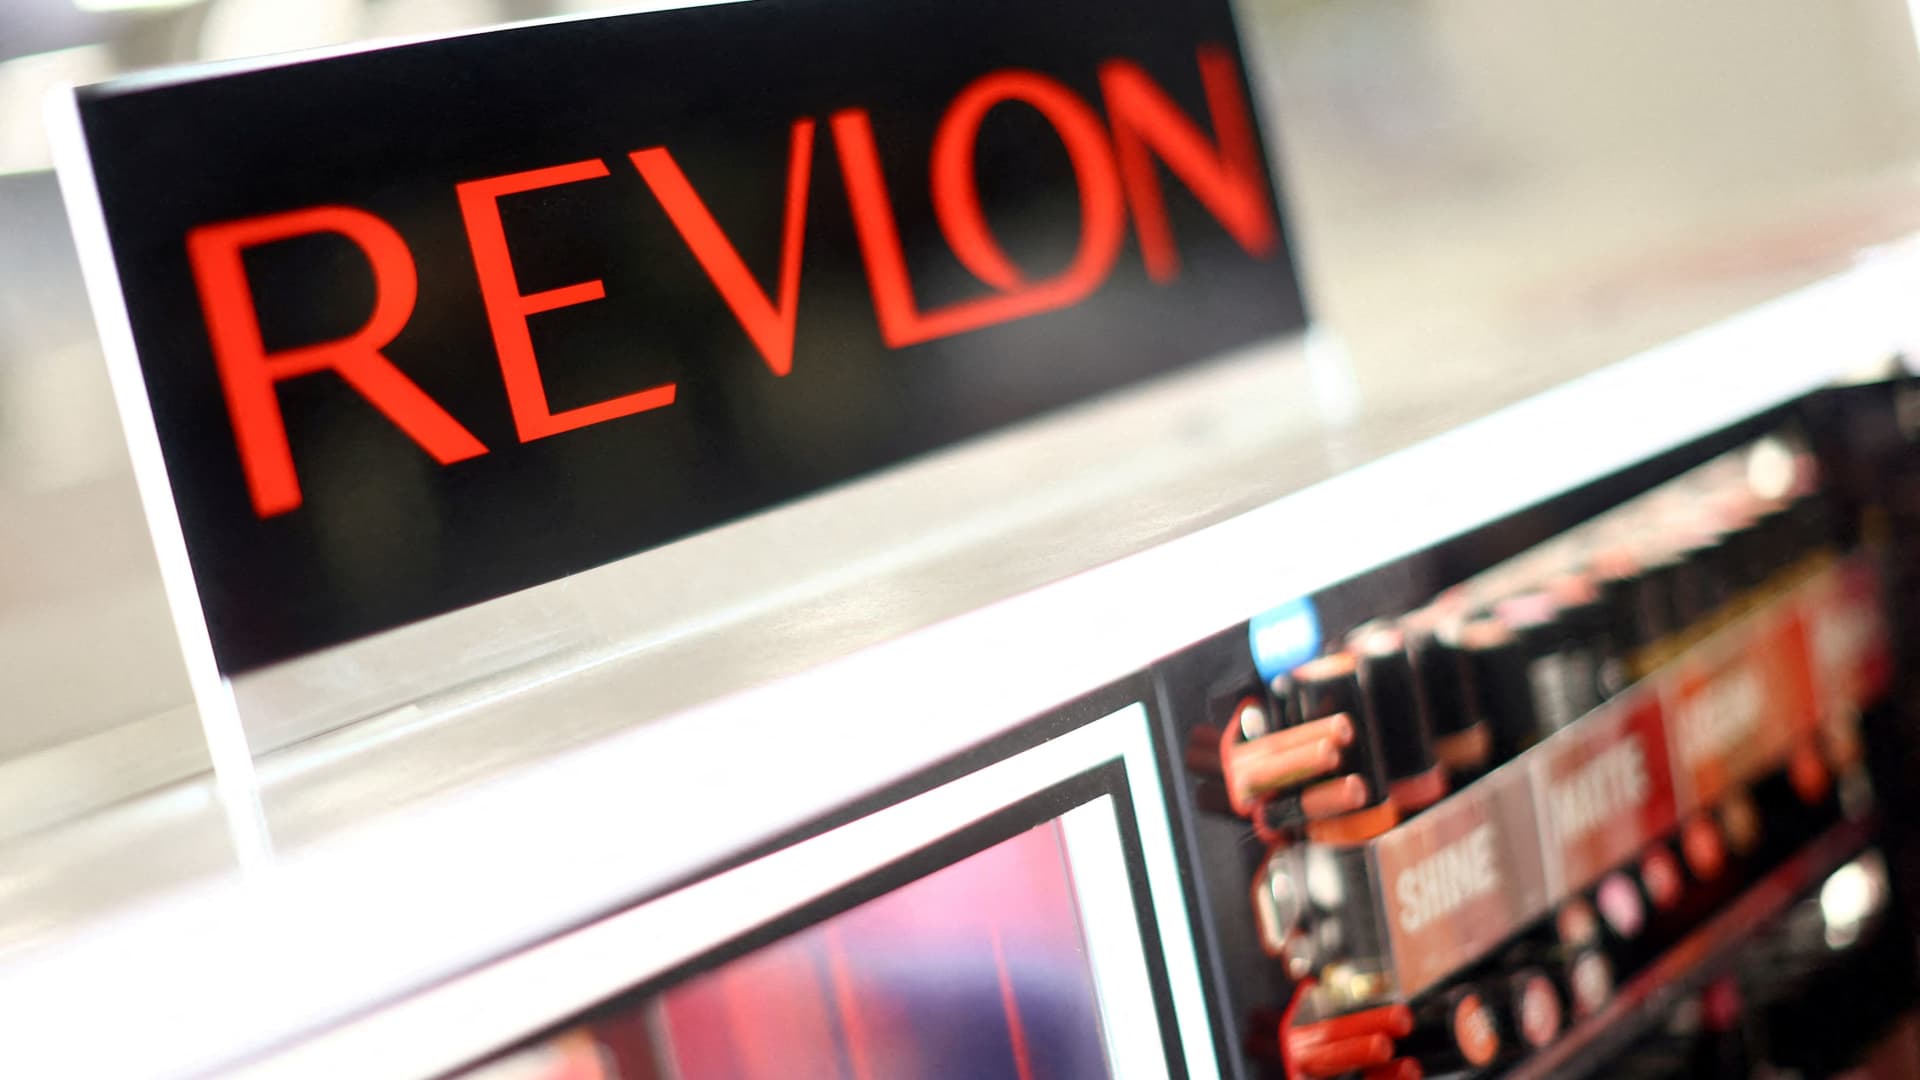 Stocks making the biggest moves midday: Digital World, Domino's, Revlon, Albertsons and more